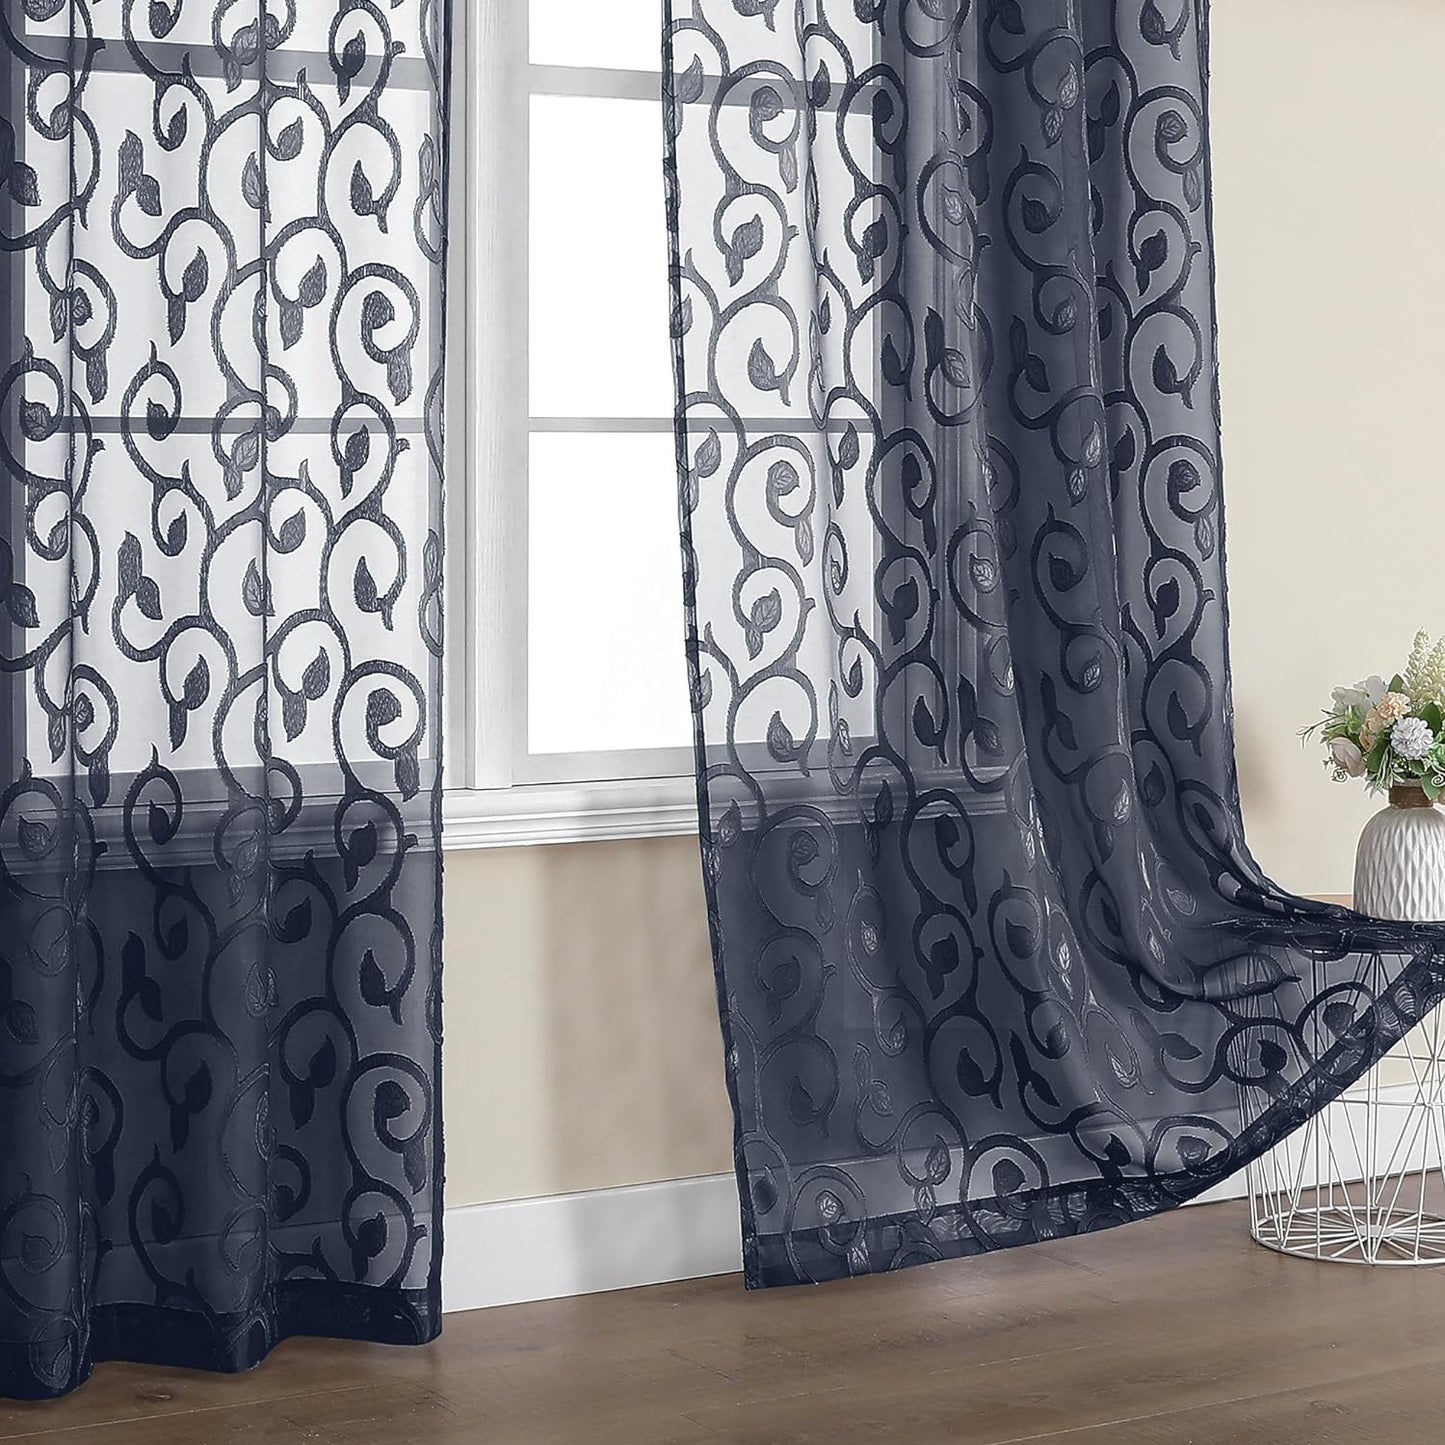 OWENIE Furman Sheer White Curtains 84 Inches Long for Bedroom Living Room 2 Panels Set, White Curtains Jacquard Clip Light Filtering Semi Sheer Curtain Transparent Rod Pocket Window Drapes, 2 Pcs  OWENIE Navy Blue 40W X 72L 